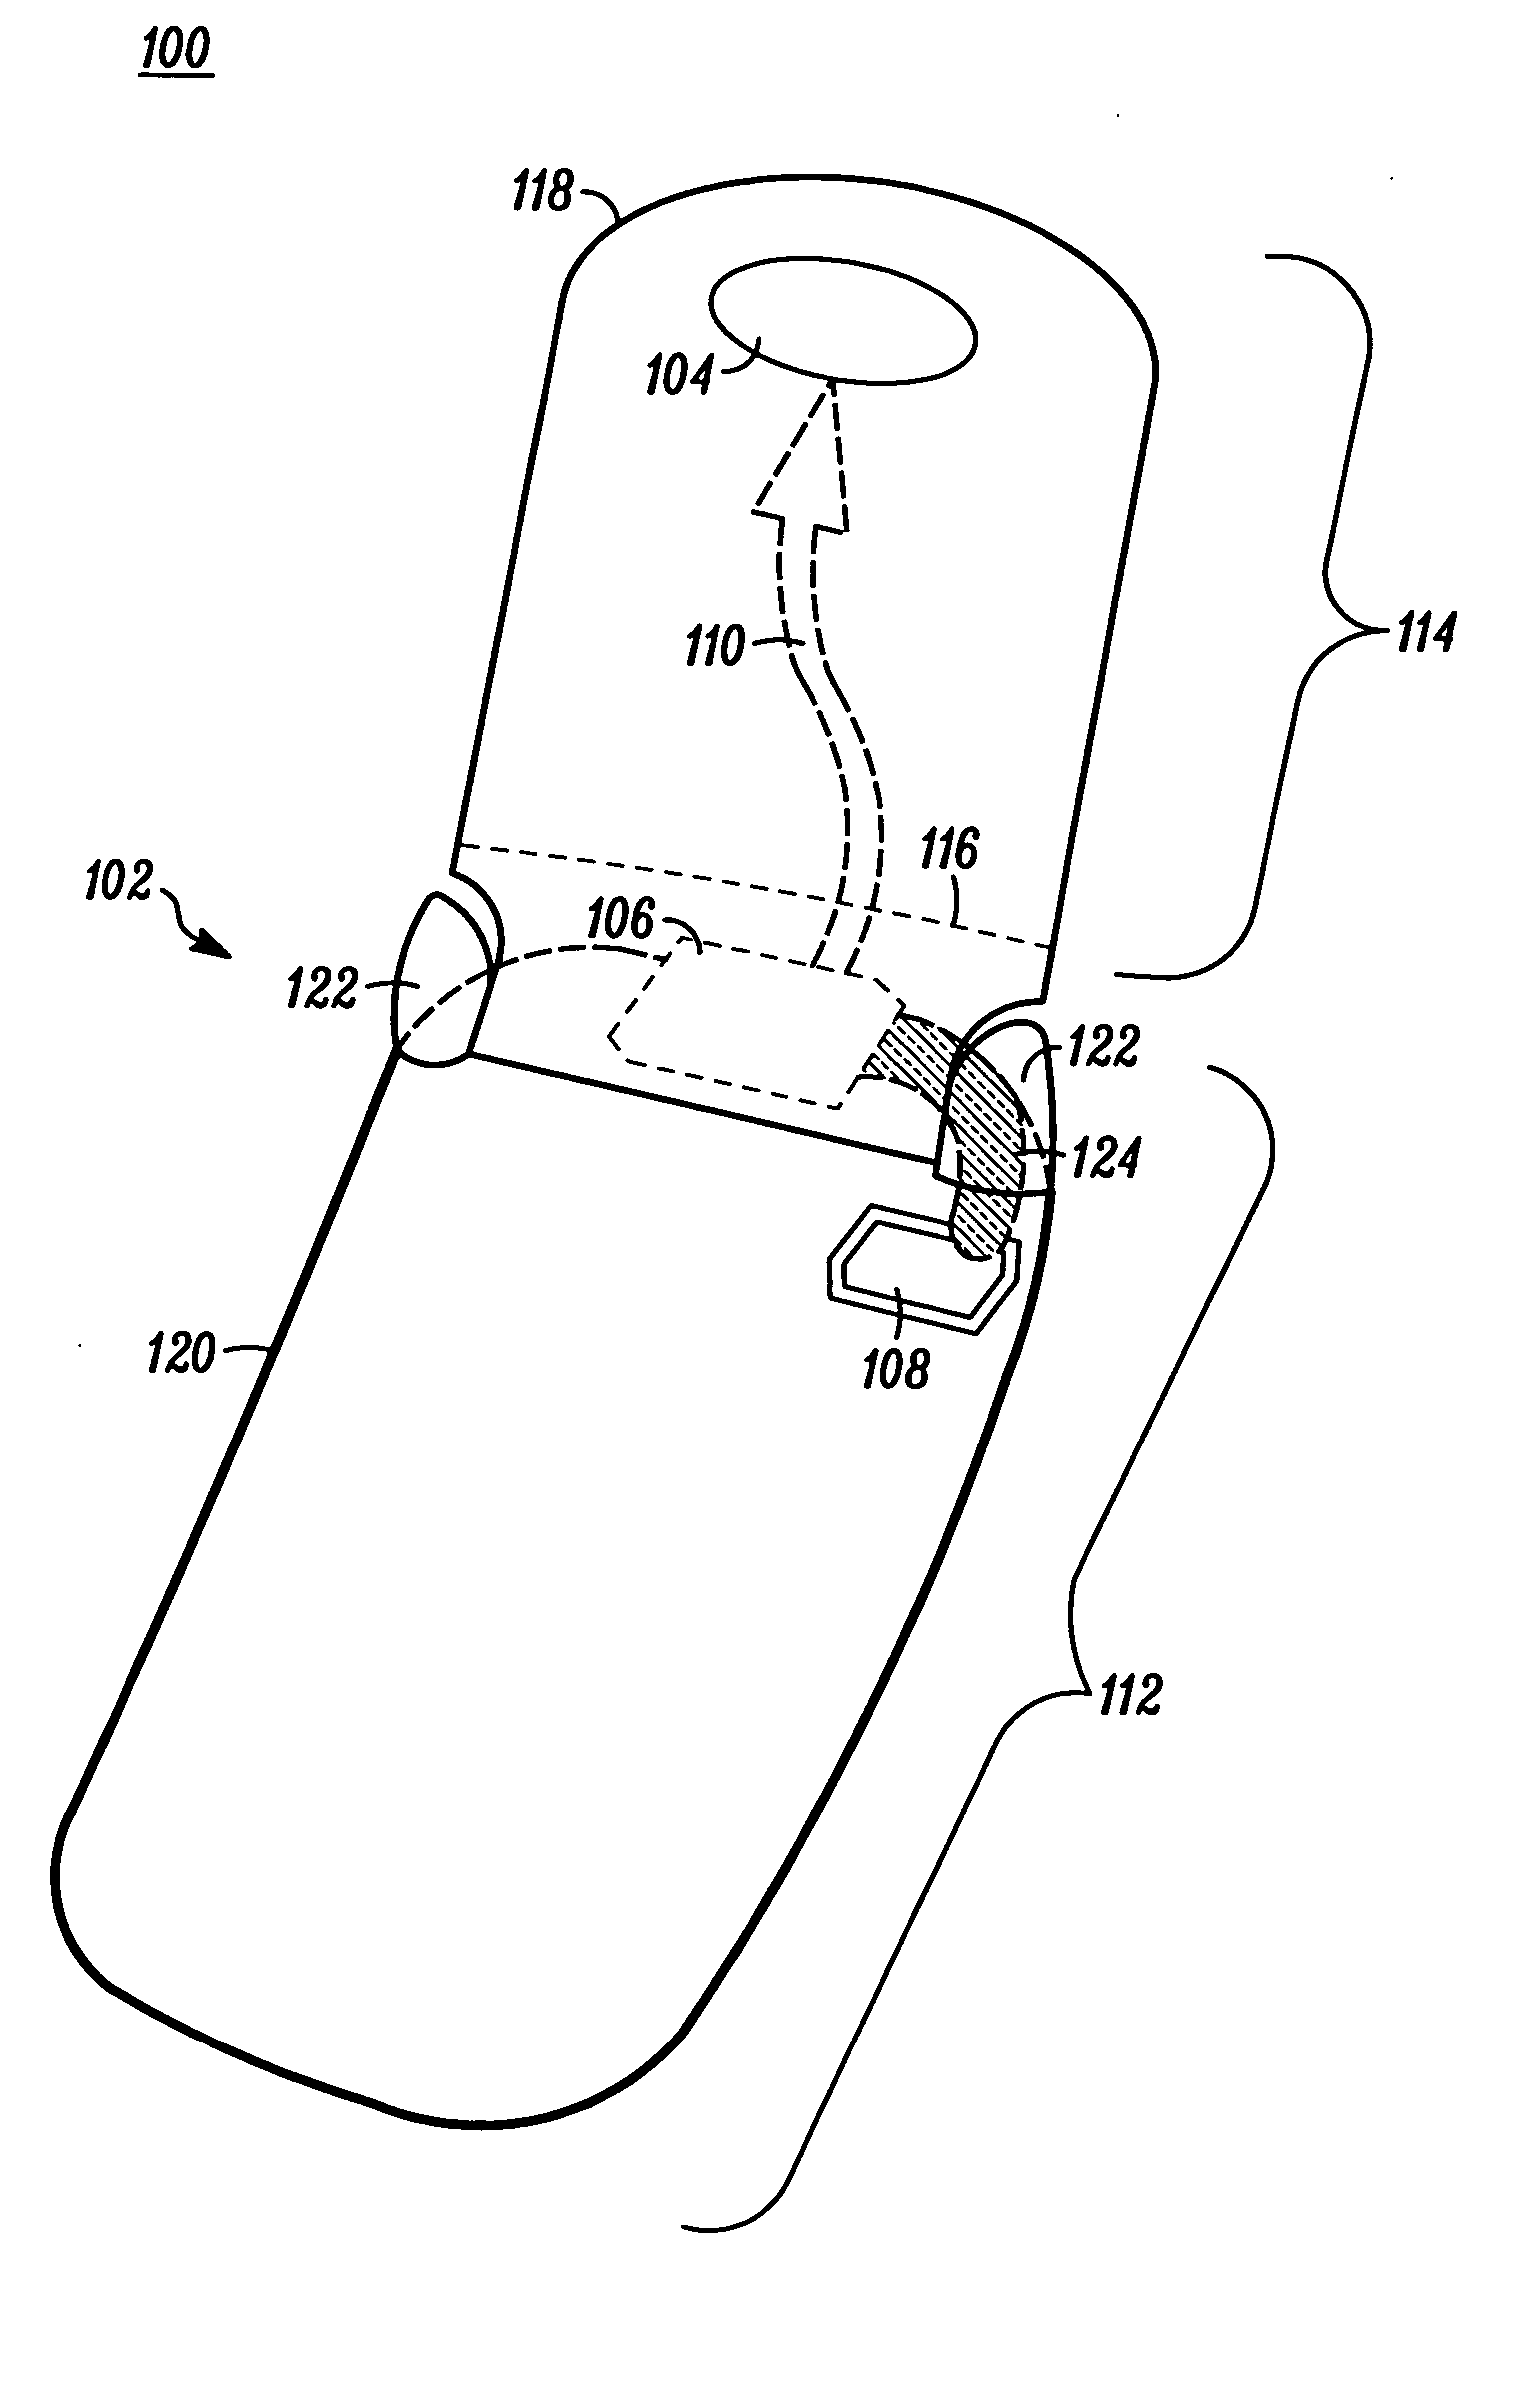 Wireless communication device having electromagnetic compatibility for hearing aid devices